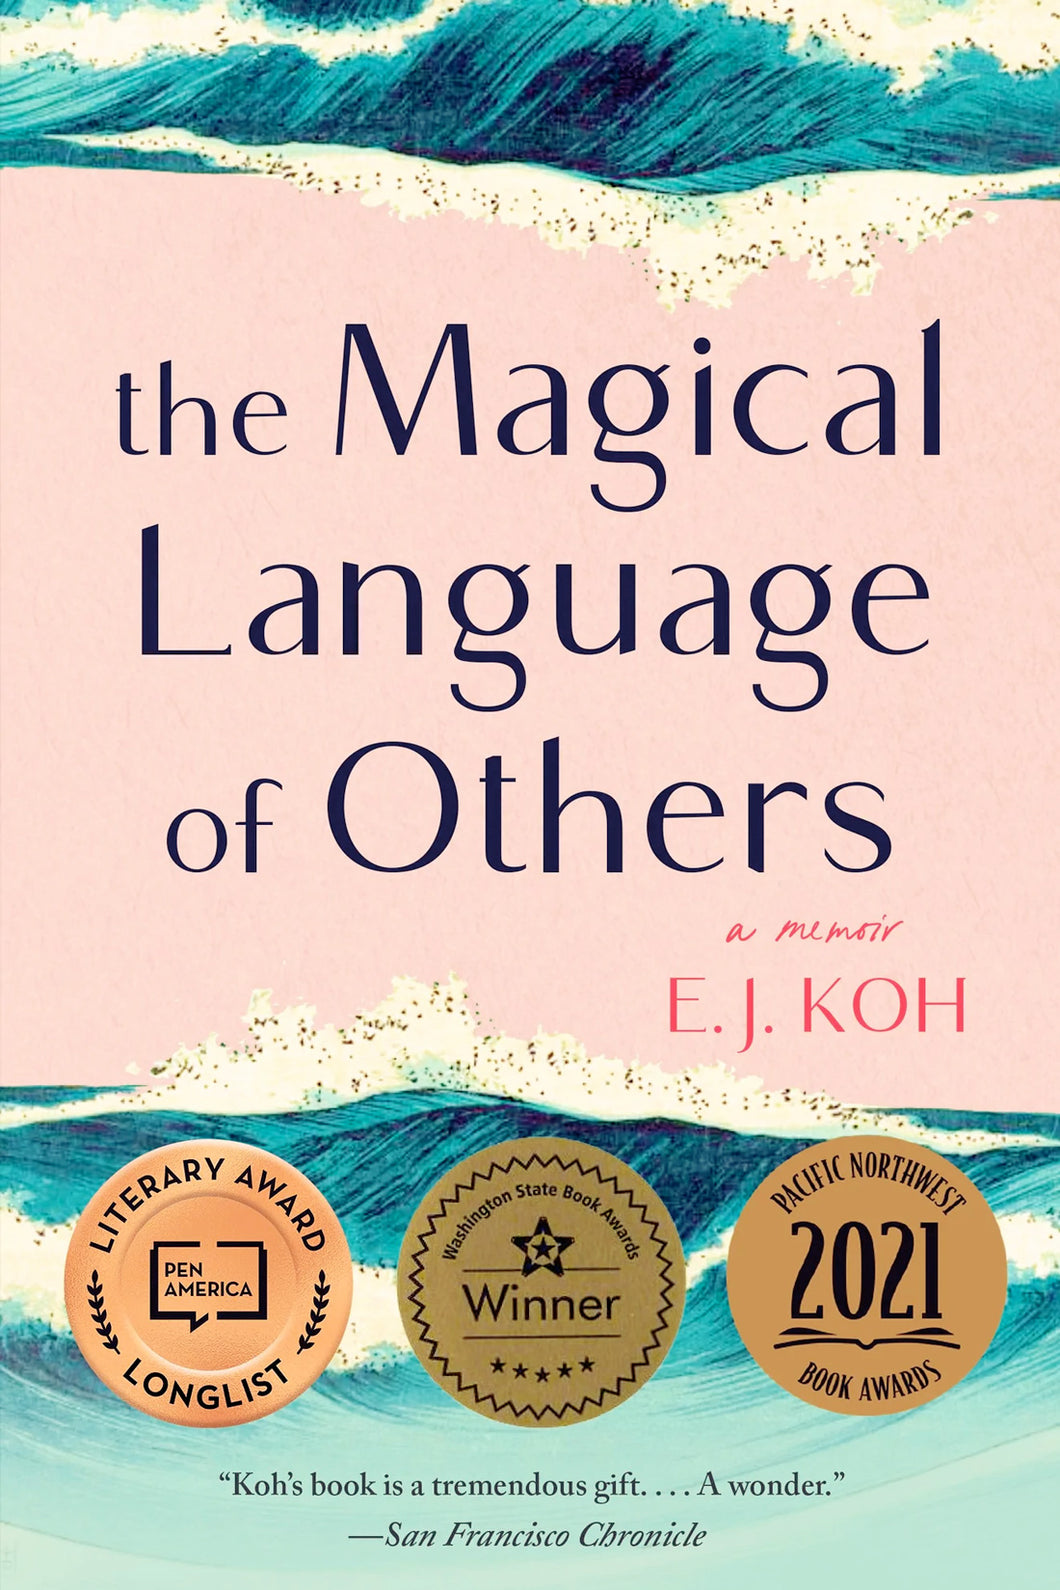 The Magical Language of Others by E. J. Koh / Hardcover or Paperback - NEW BOOK OR BOOK BOX